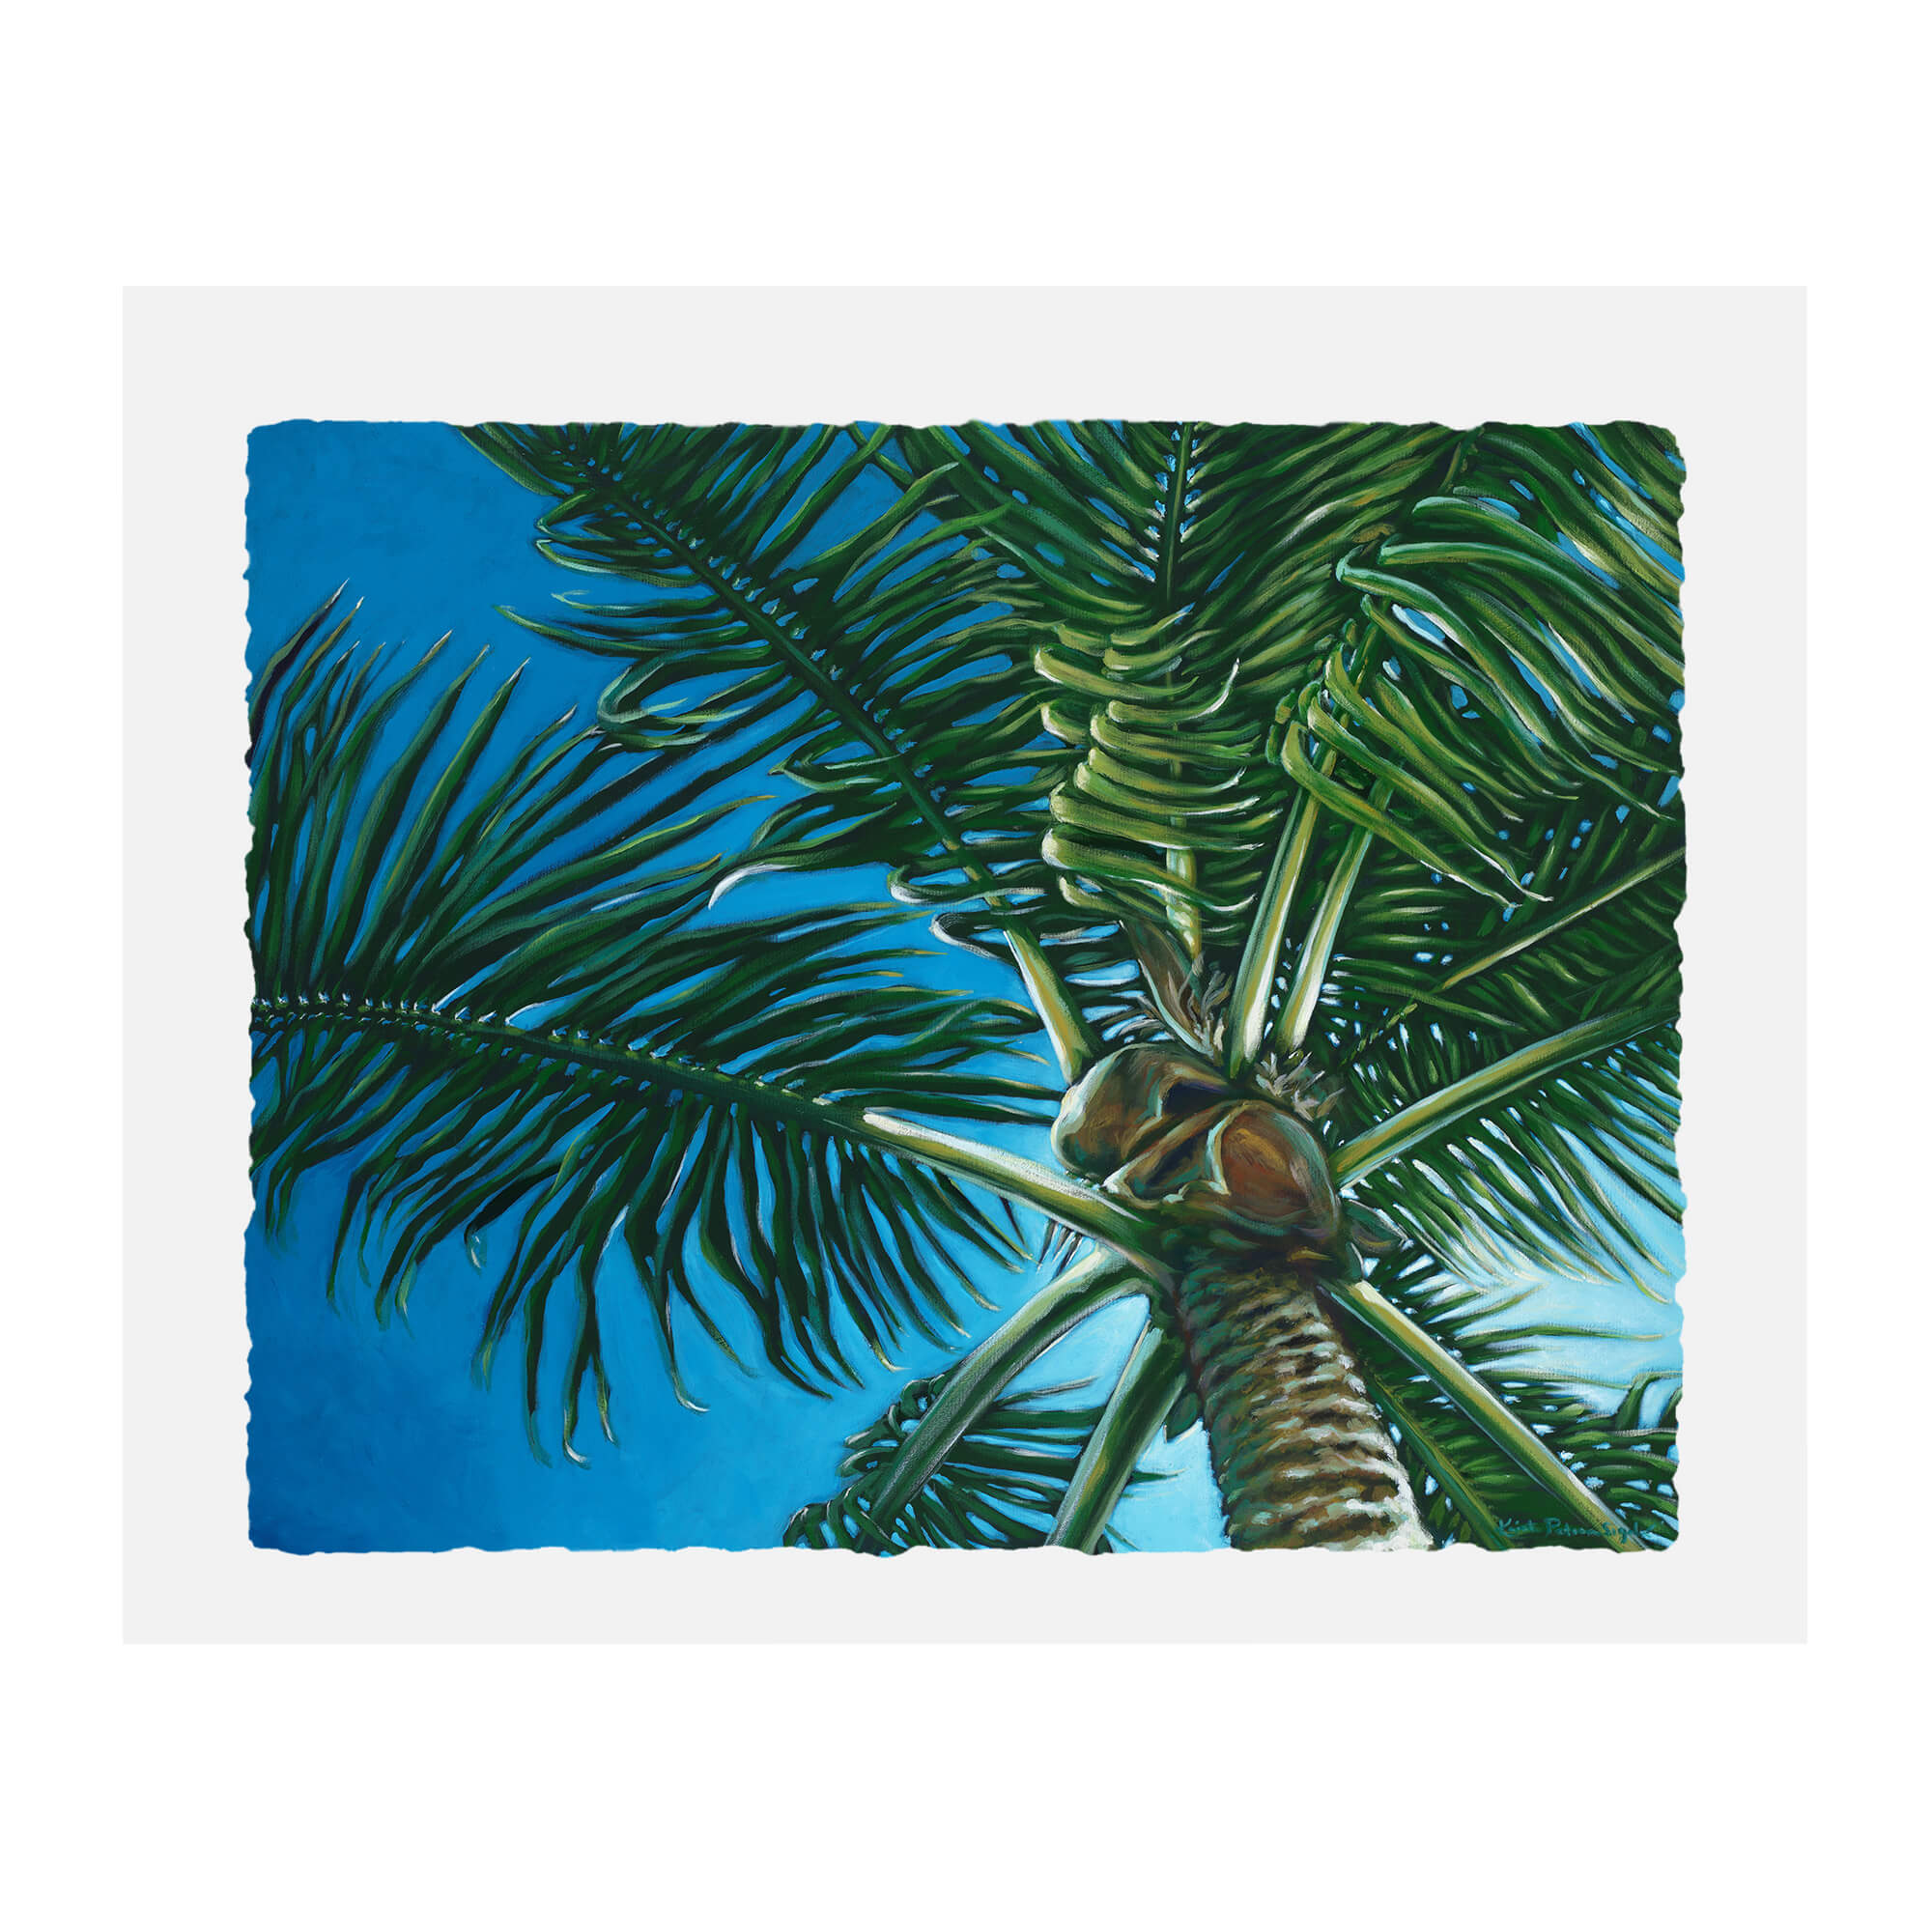 Paper art print featuring the sun being blocked by a coconut tree by hawaii artist Kristi Petosa 